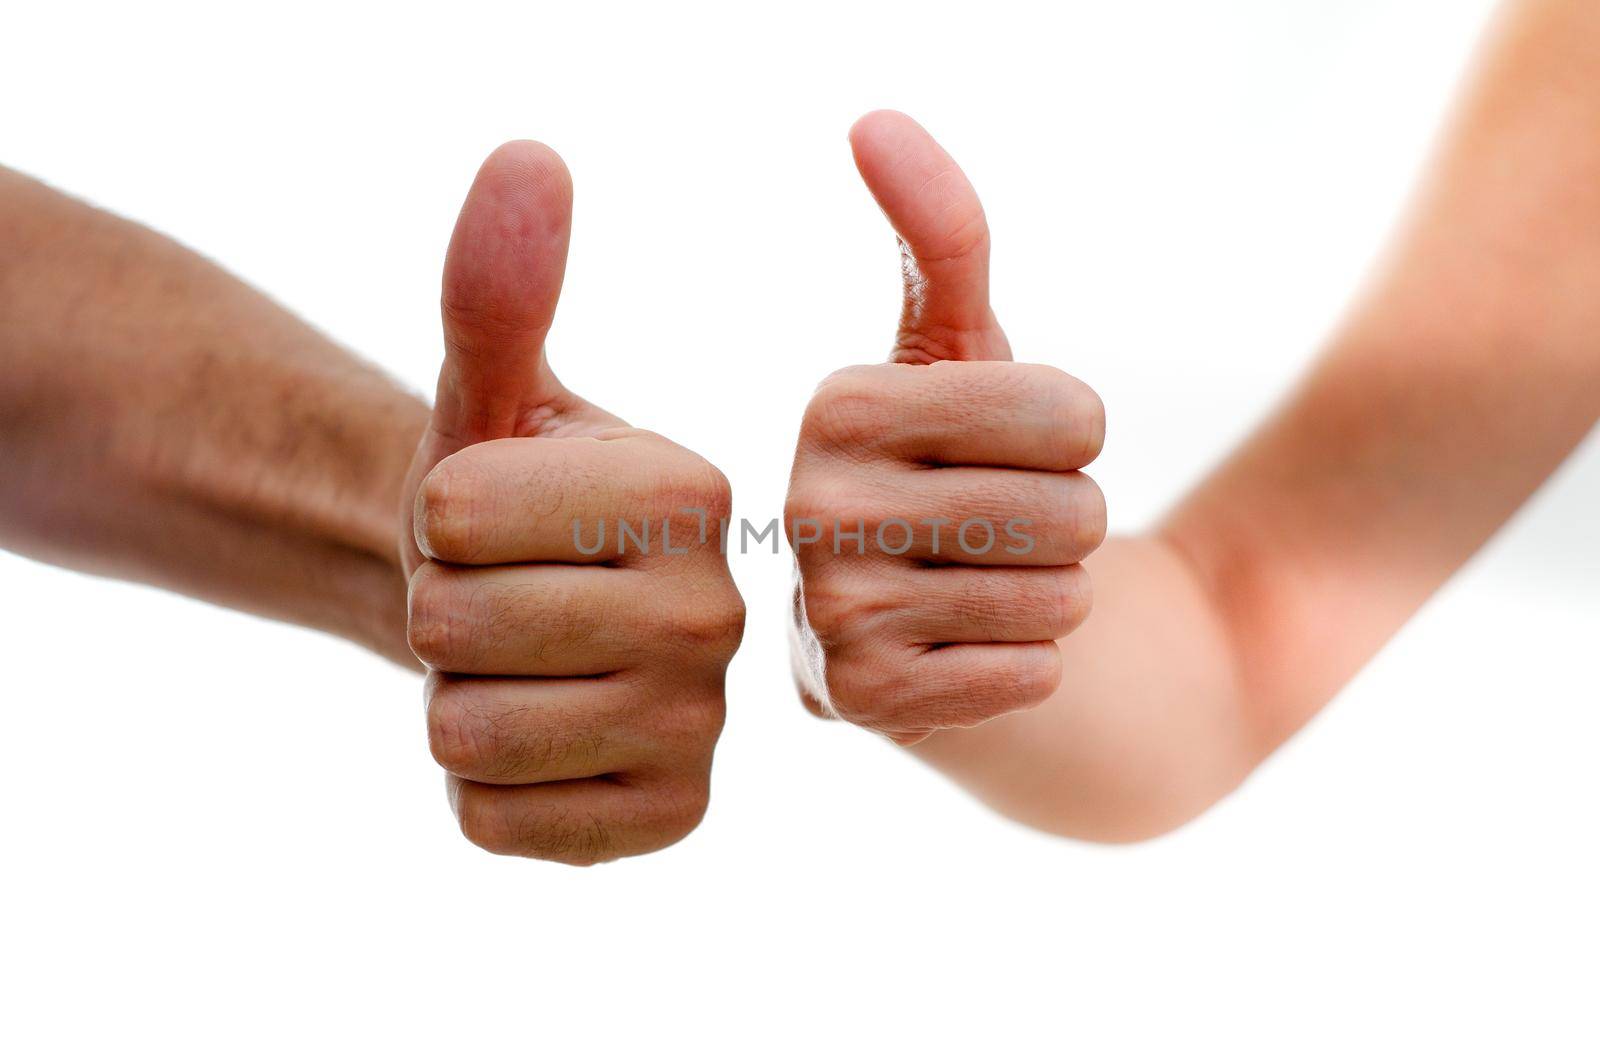 Man and woman hands showing thumbs up sign isolated on white background